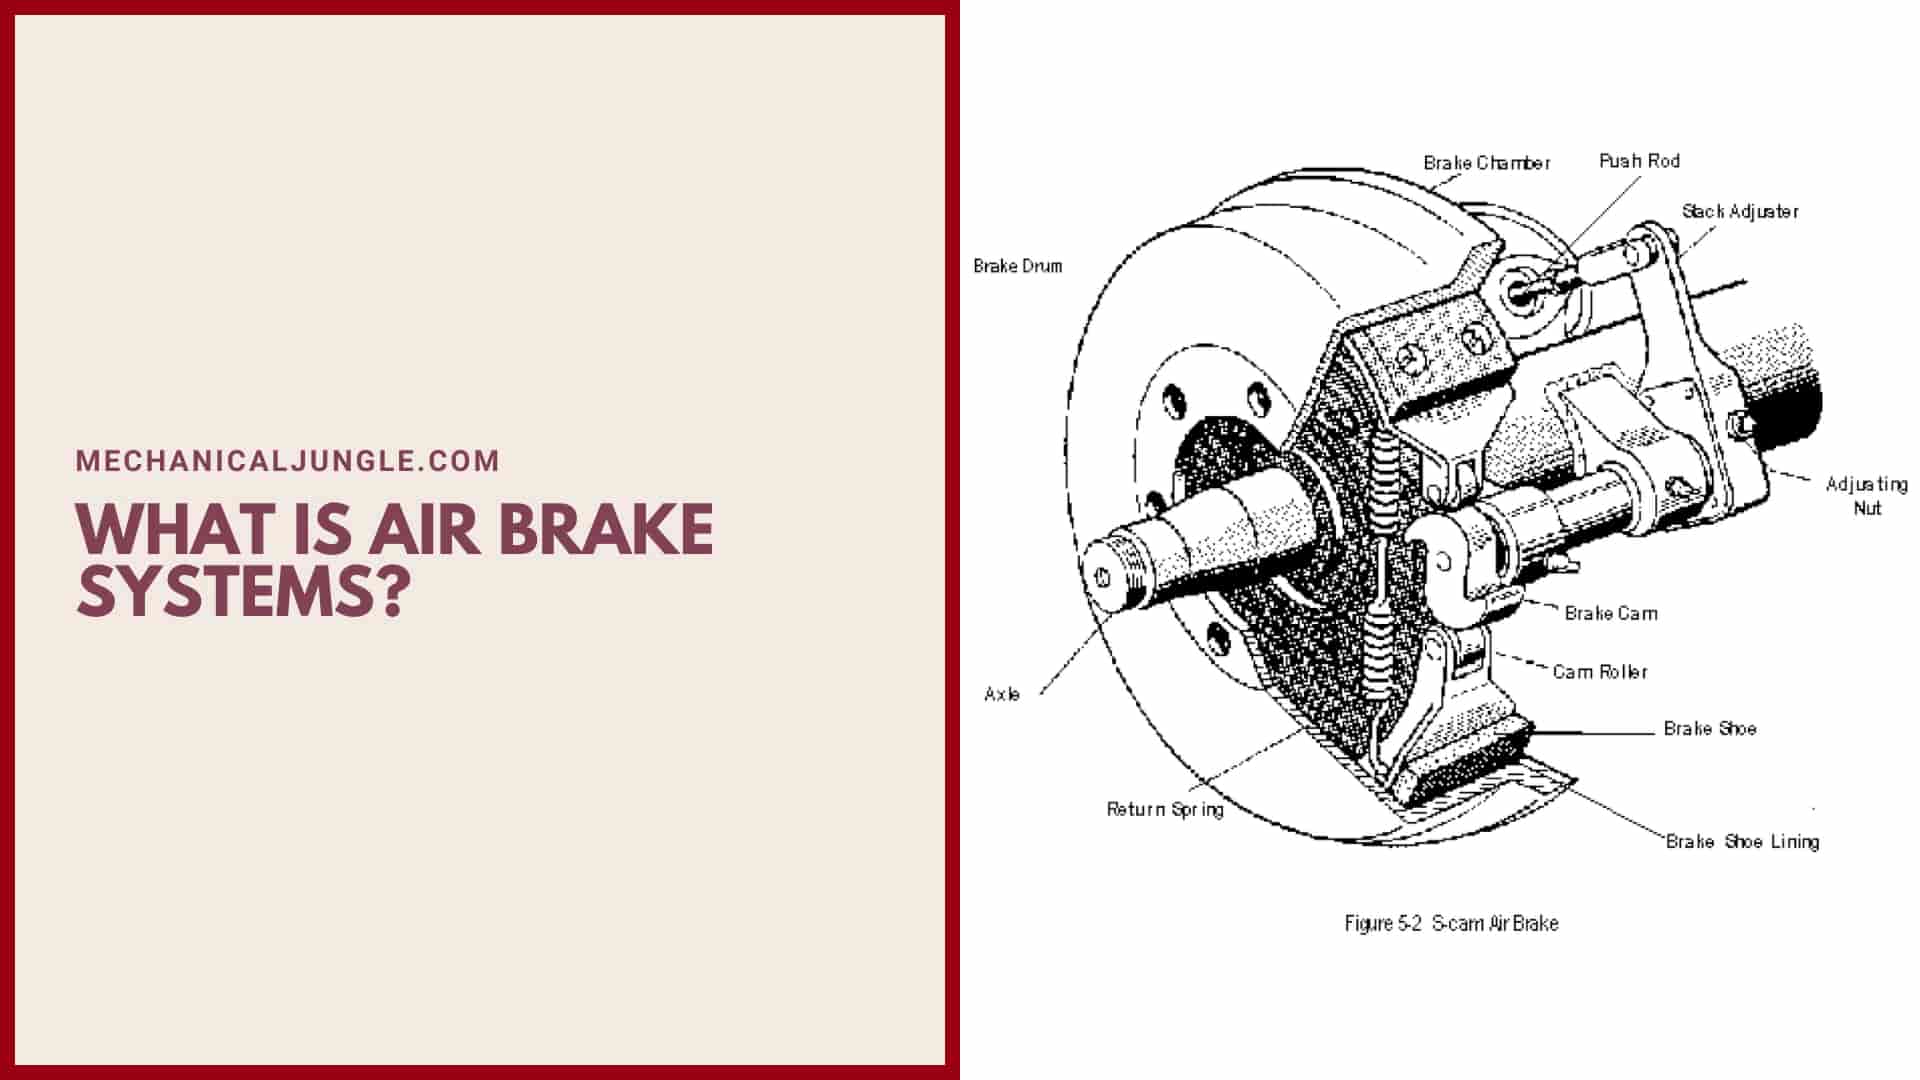 What Is Air Brake Systems?